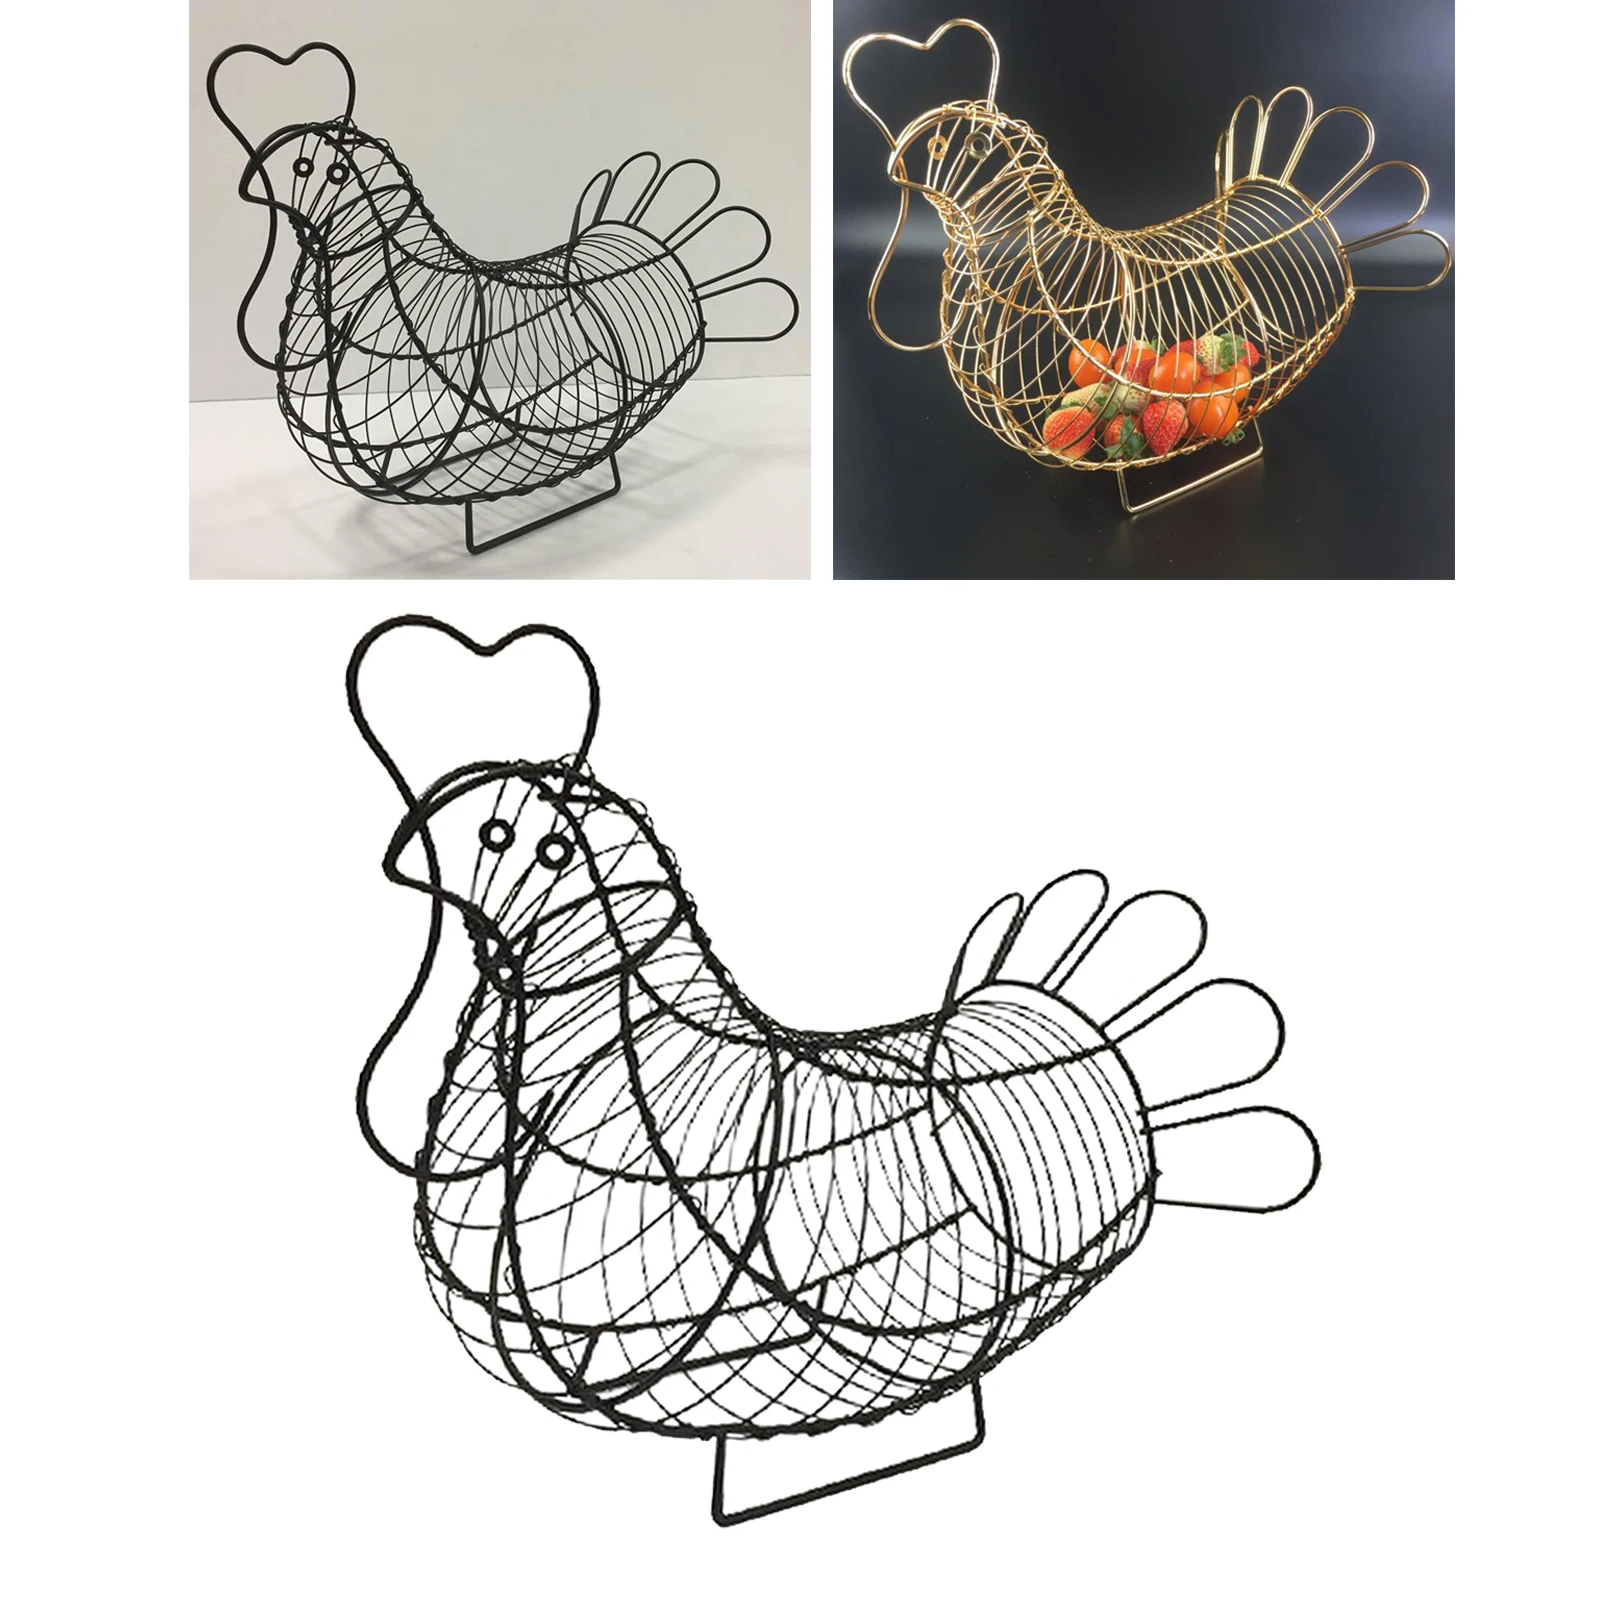 Metal Wire Egg Storage Basket, Hen Egg Wire Holder with Carrying Handle,